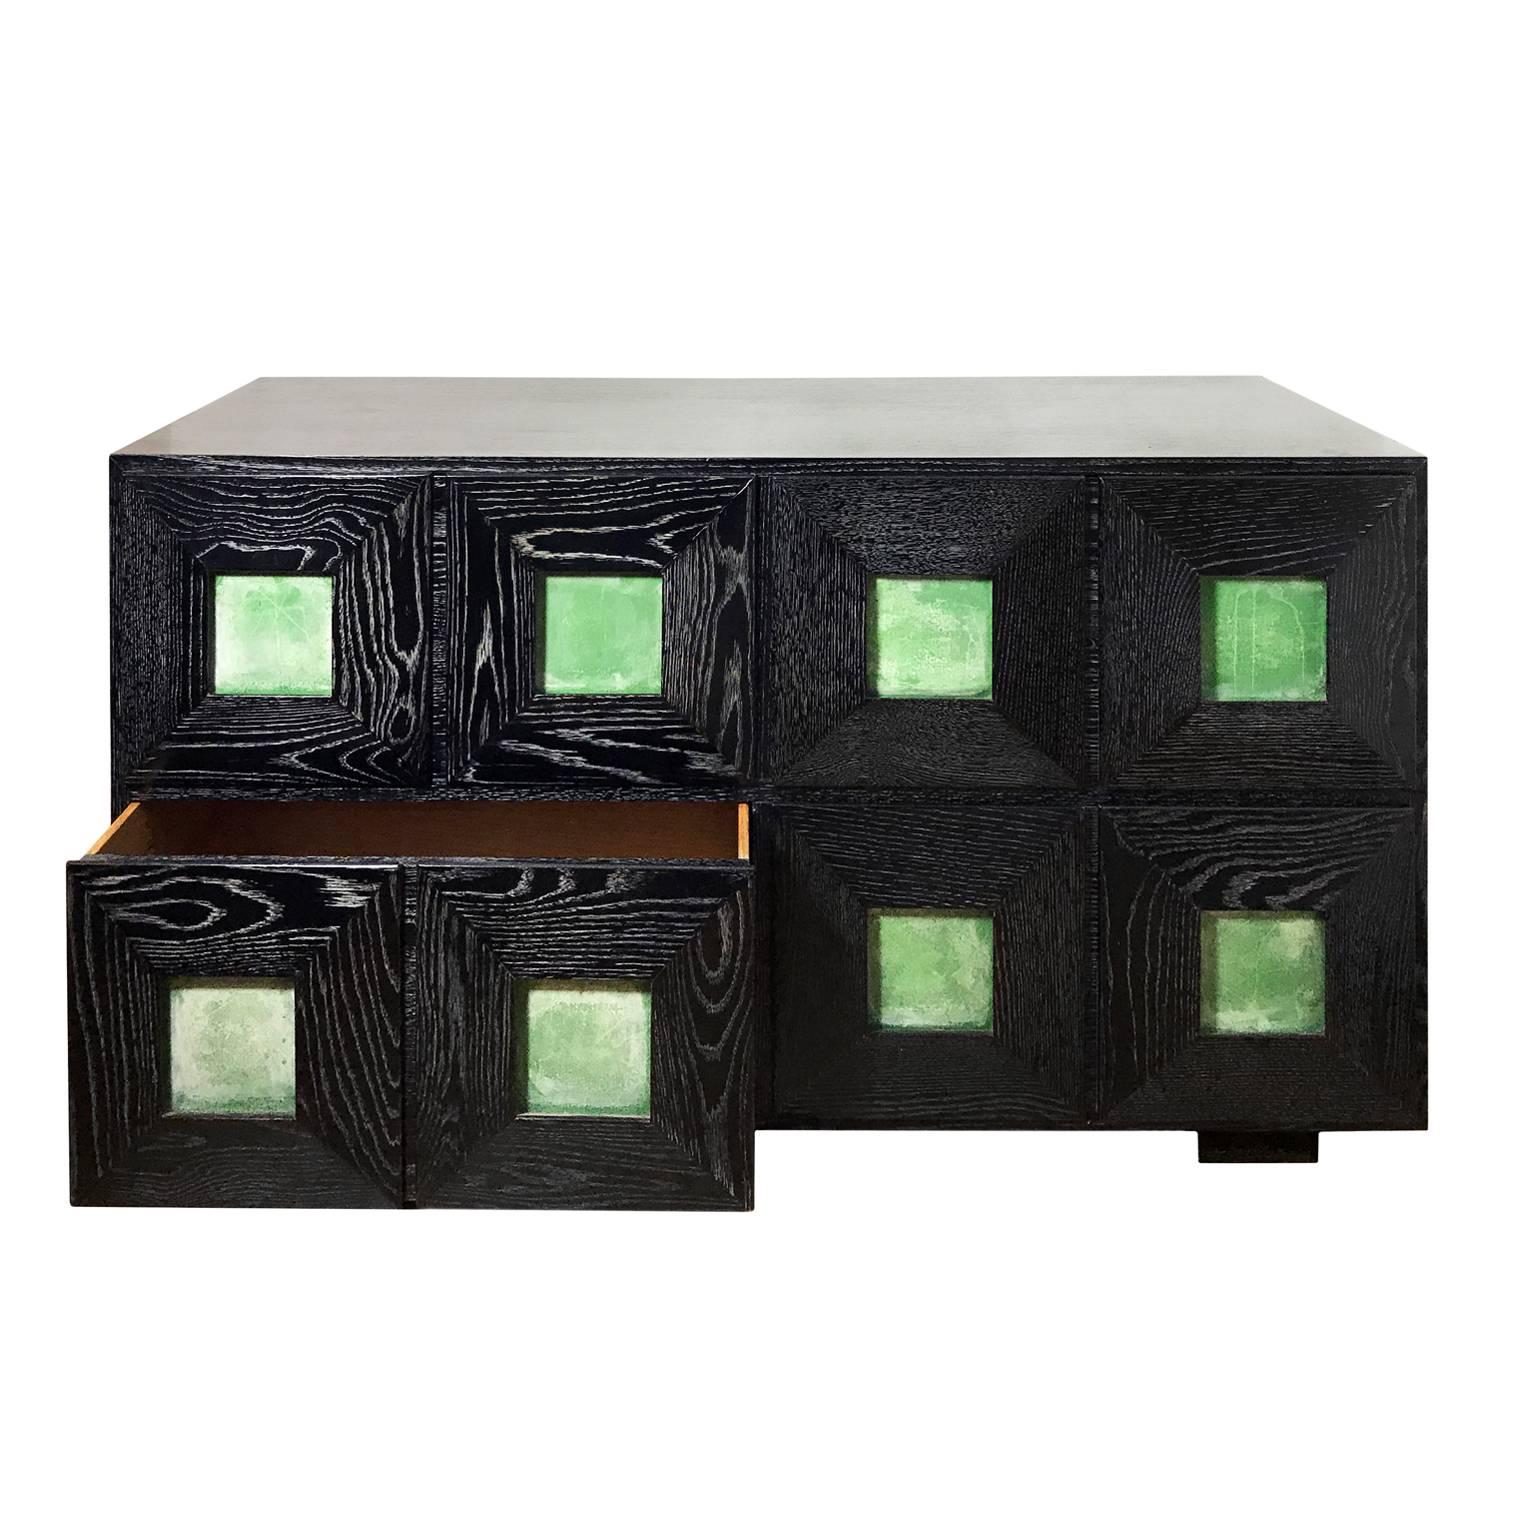 Vintage cerused oak chest of drawers with matte green goatskin panels.